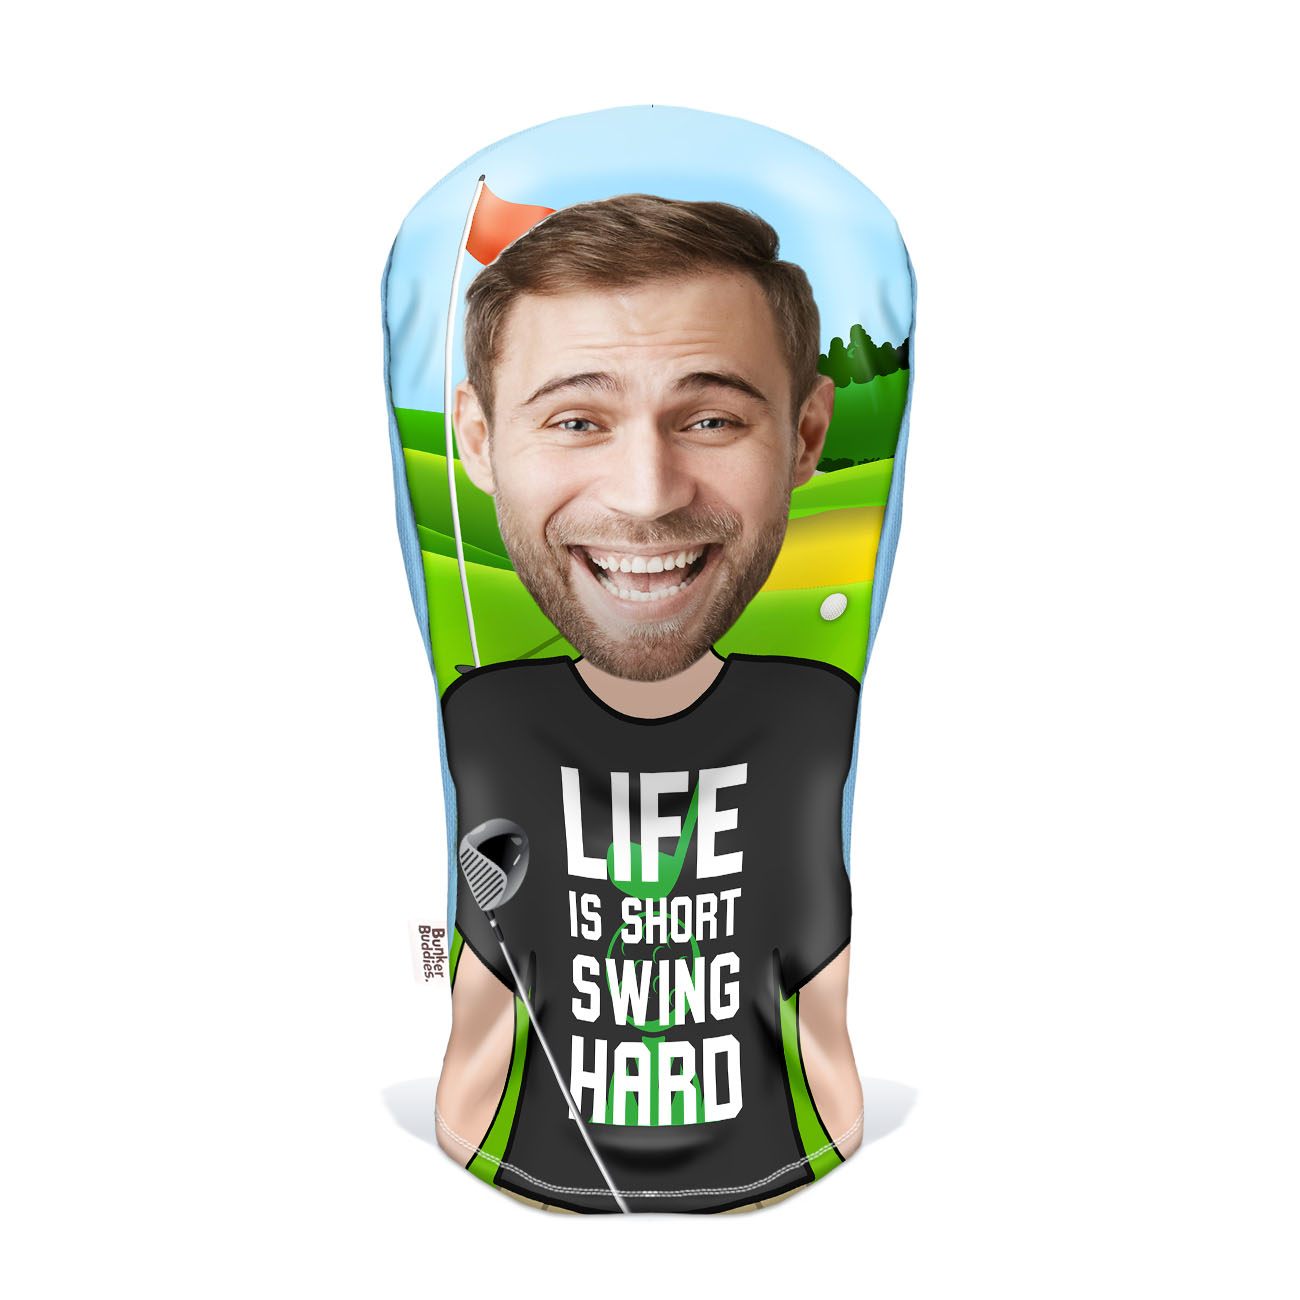 Life Is Short, Swing Hard Personalised Golf Head Cover